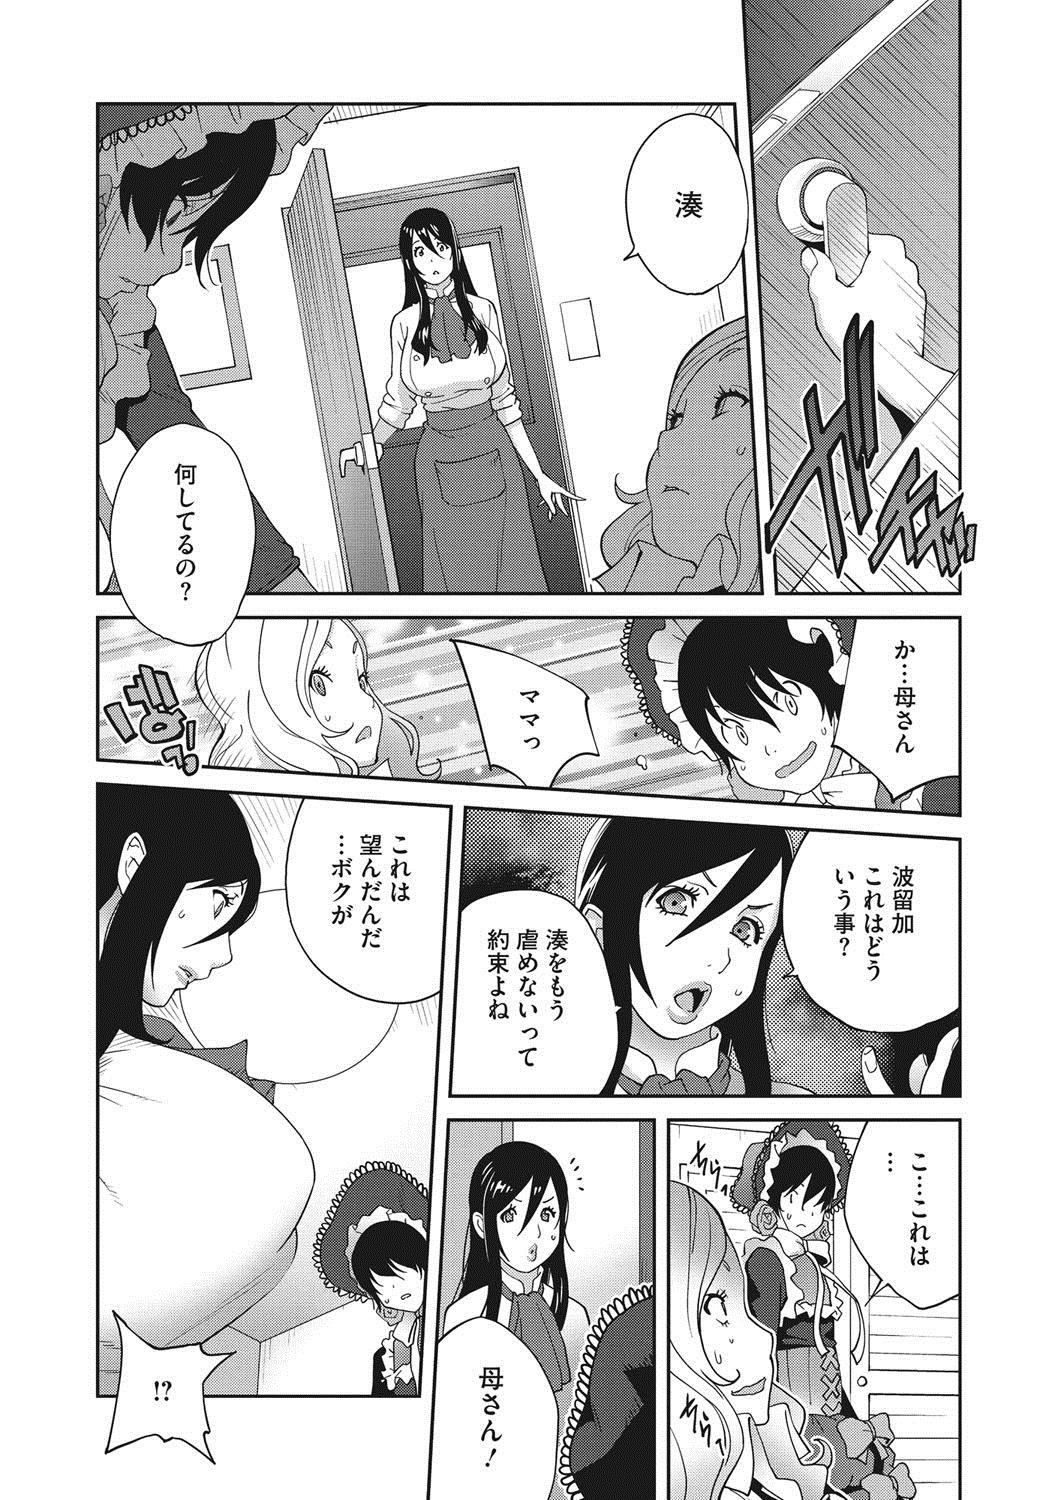 [Kotoyoshi Yumisuke] Haha to Ane to Aoi Ichigo no Fromage - Fromage of mother and an older sister and a blue strawberry Ch. 1-3 48